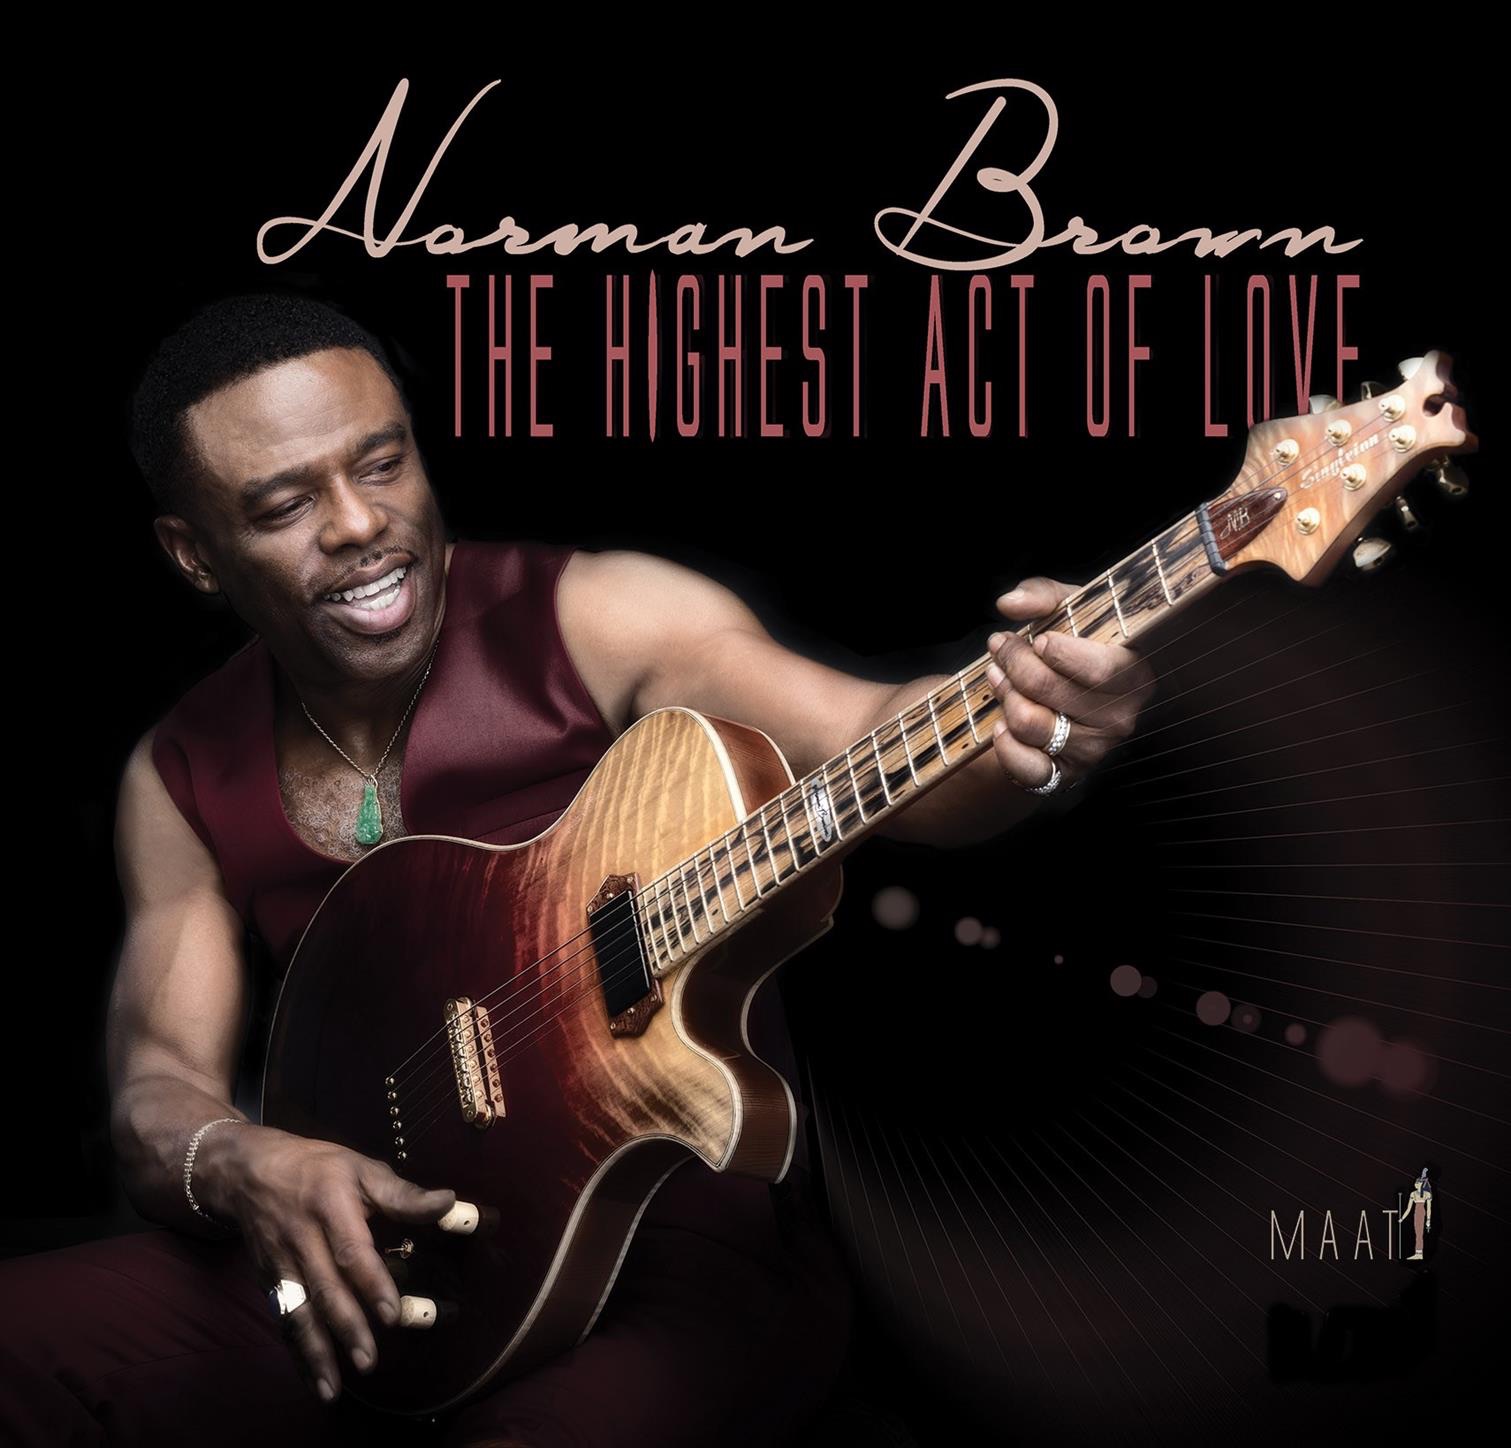 NORMAN BROWN - The Highest Act Of Love (2019) [FLAC 24bit/44,1kHz]